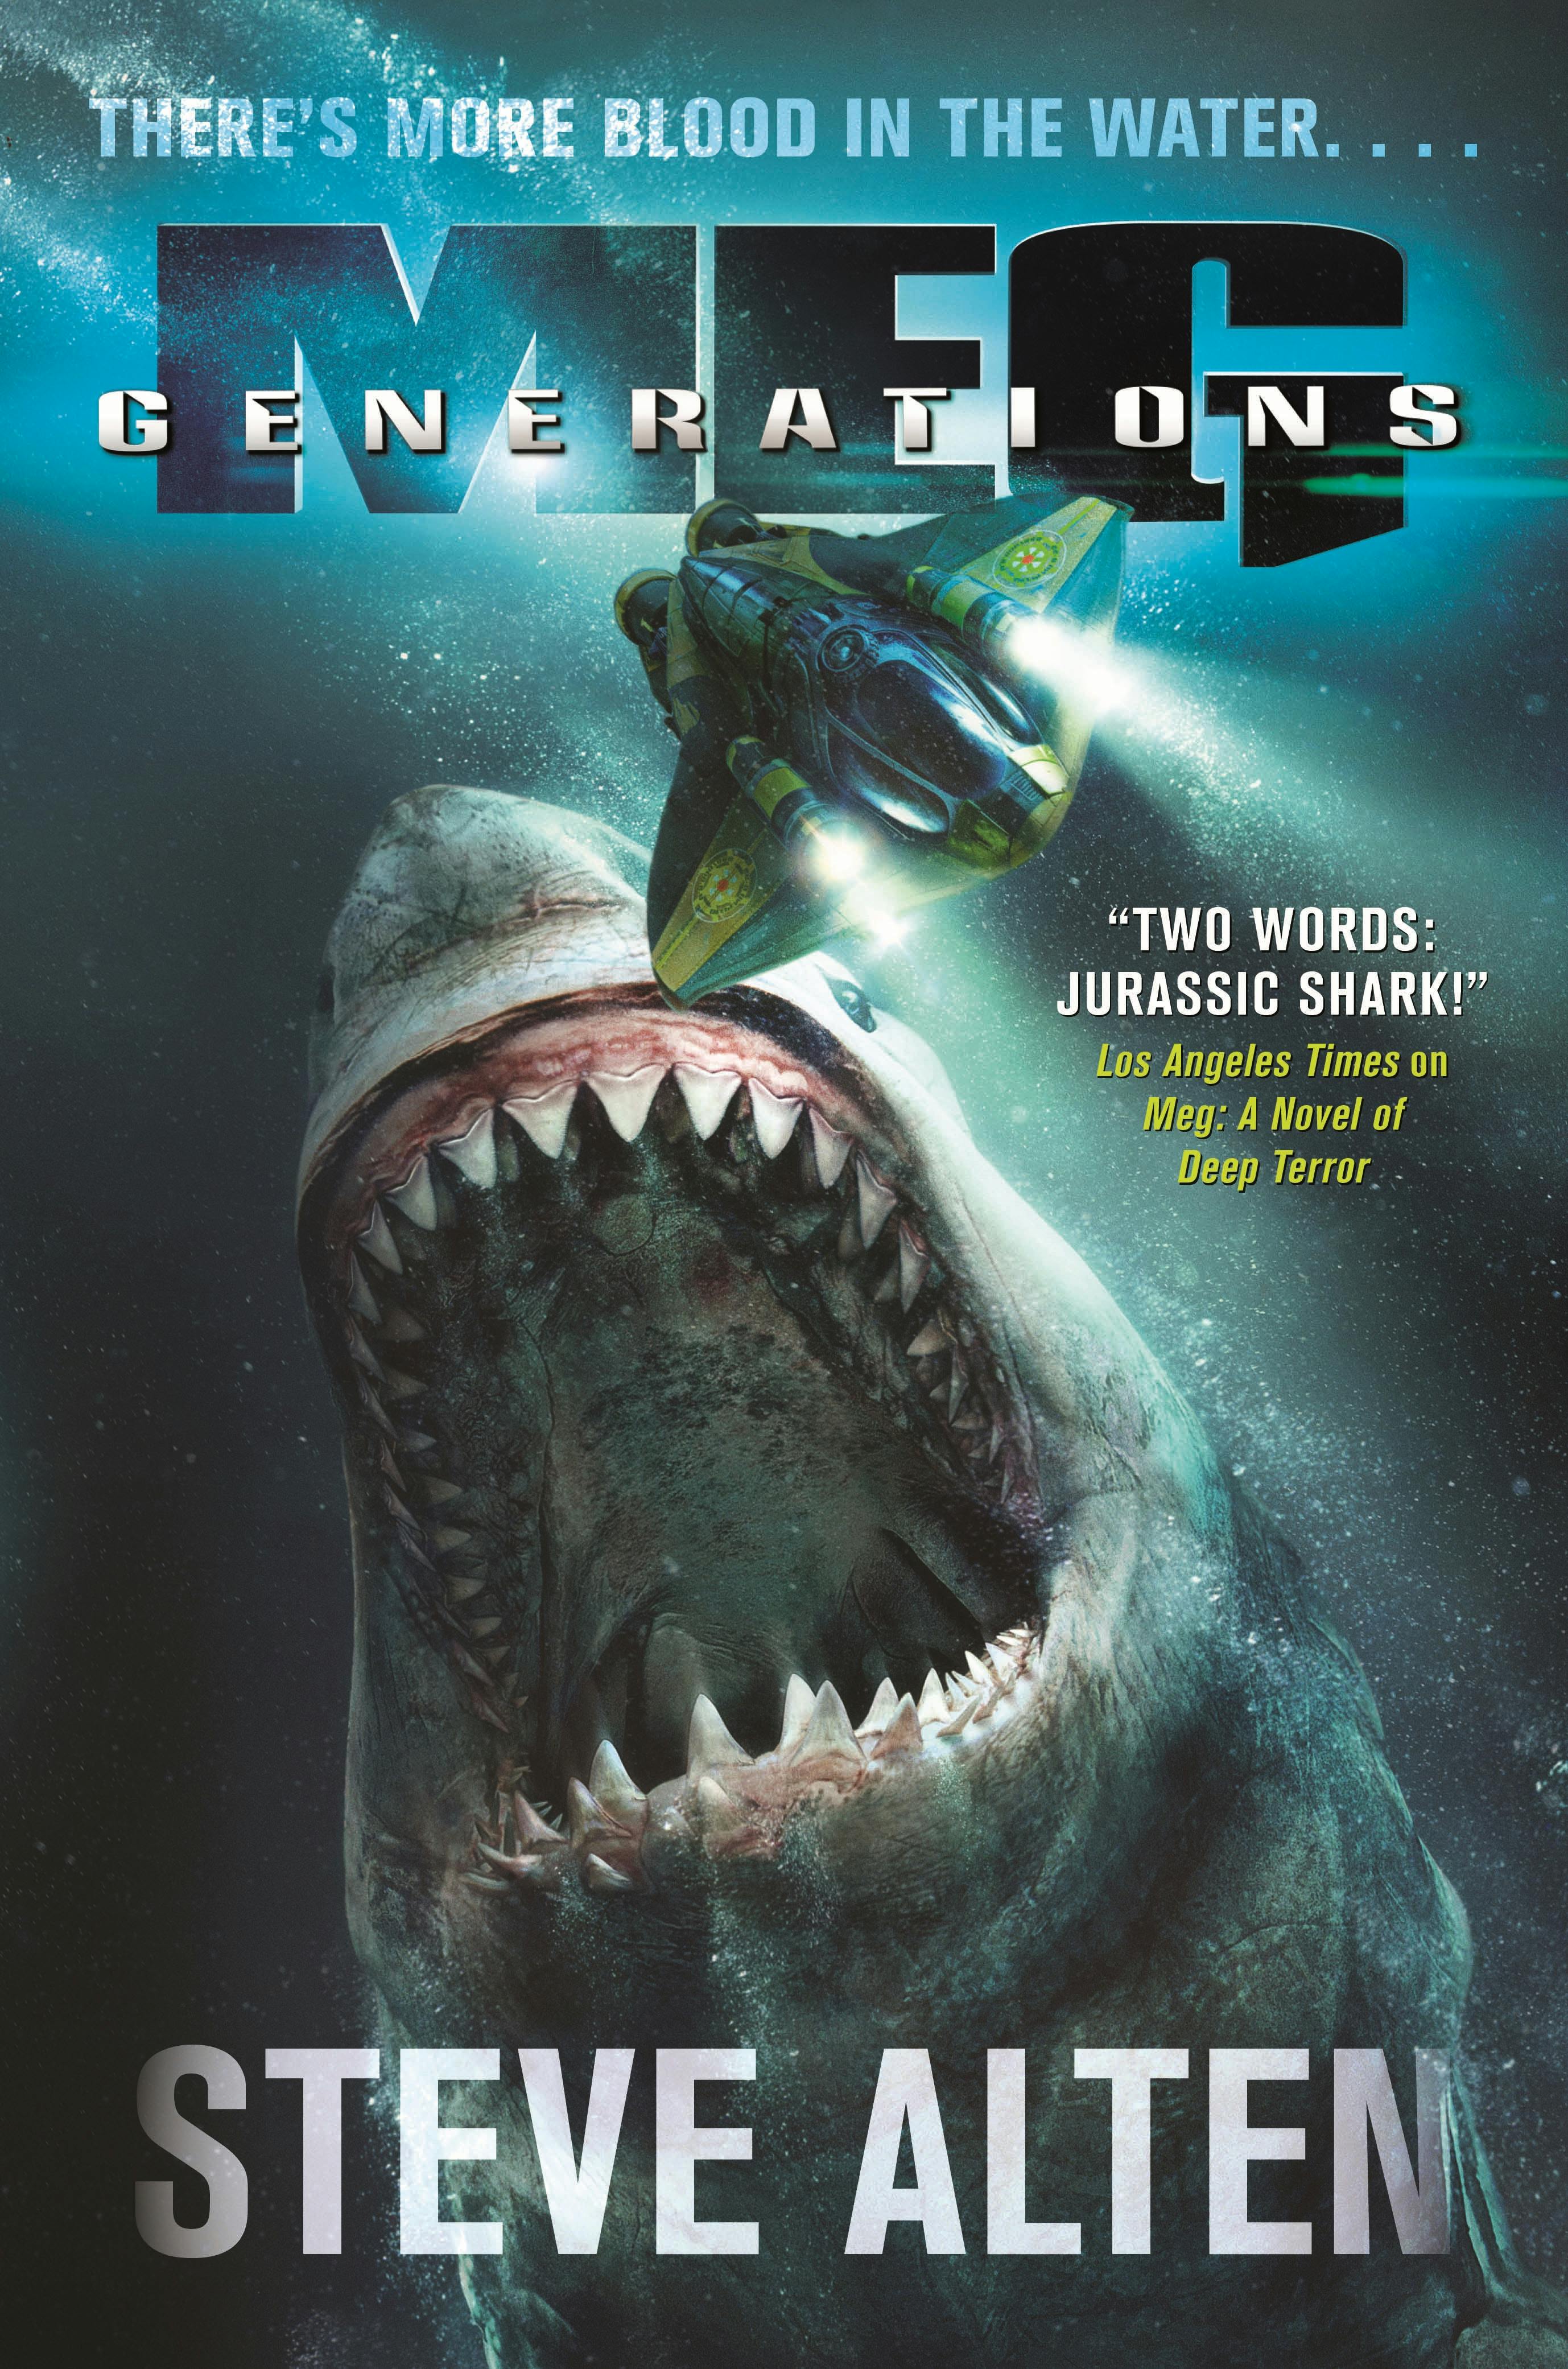 Cover for the book titled as: MEG: Generations